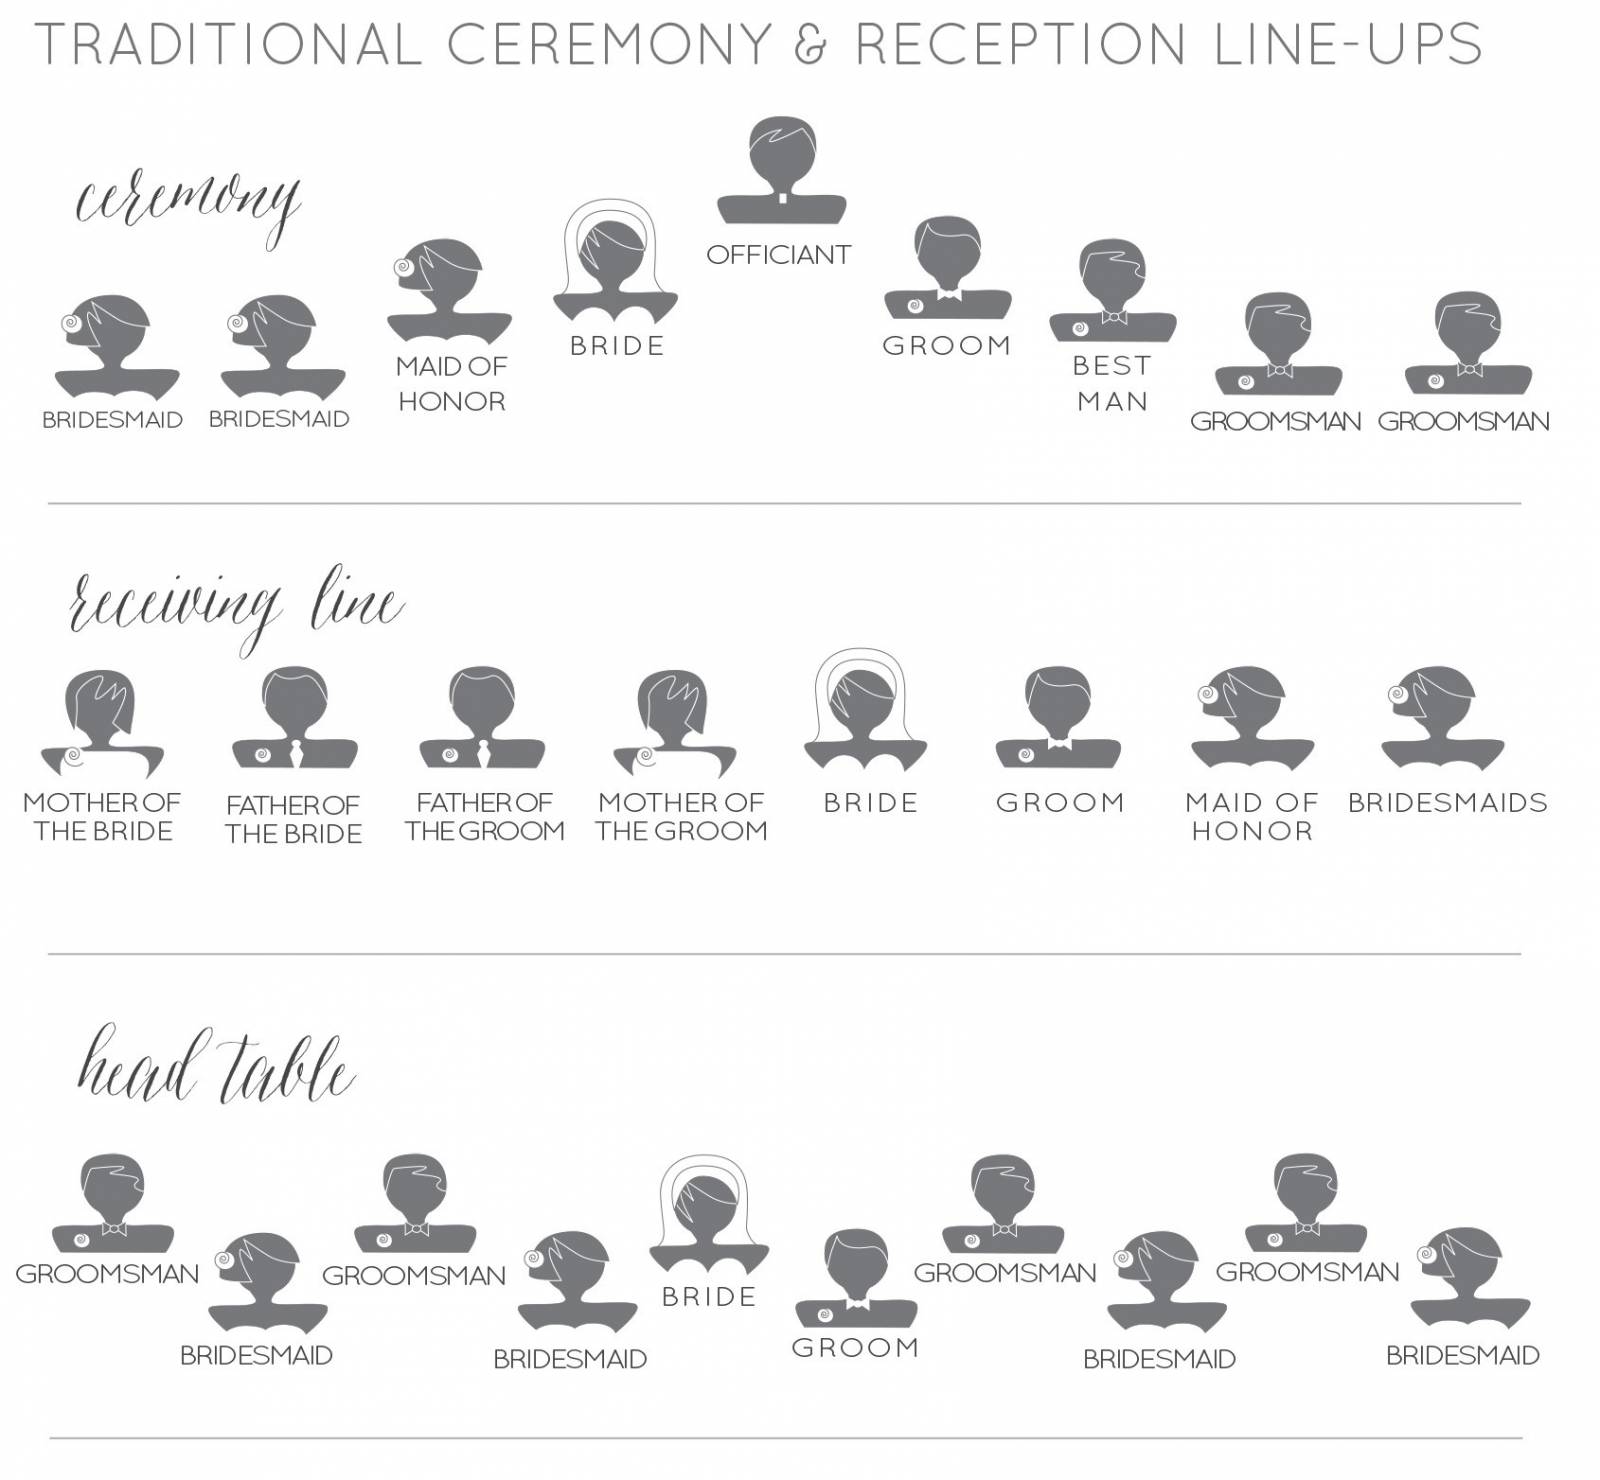 ceremony lineup, reception lineup, traditional lineups, head table lineup